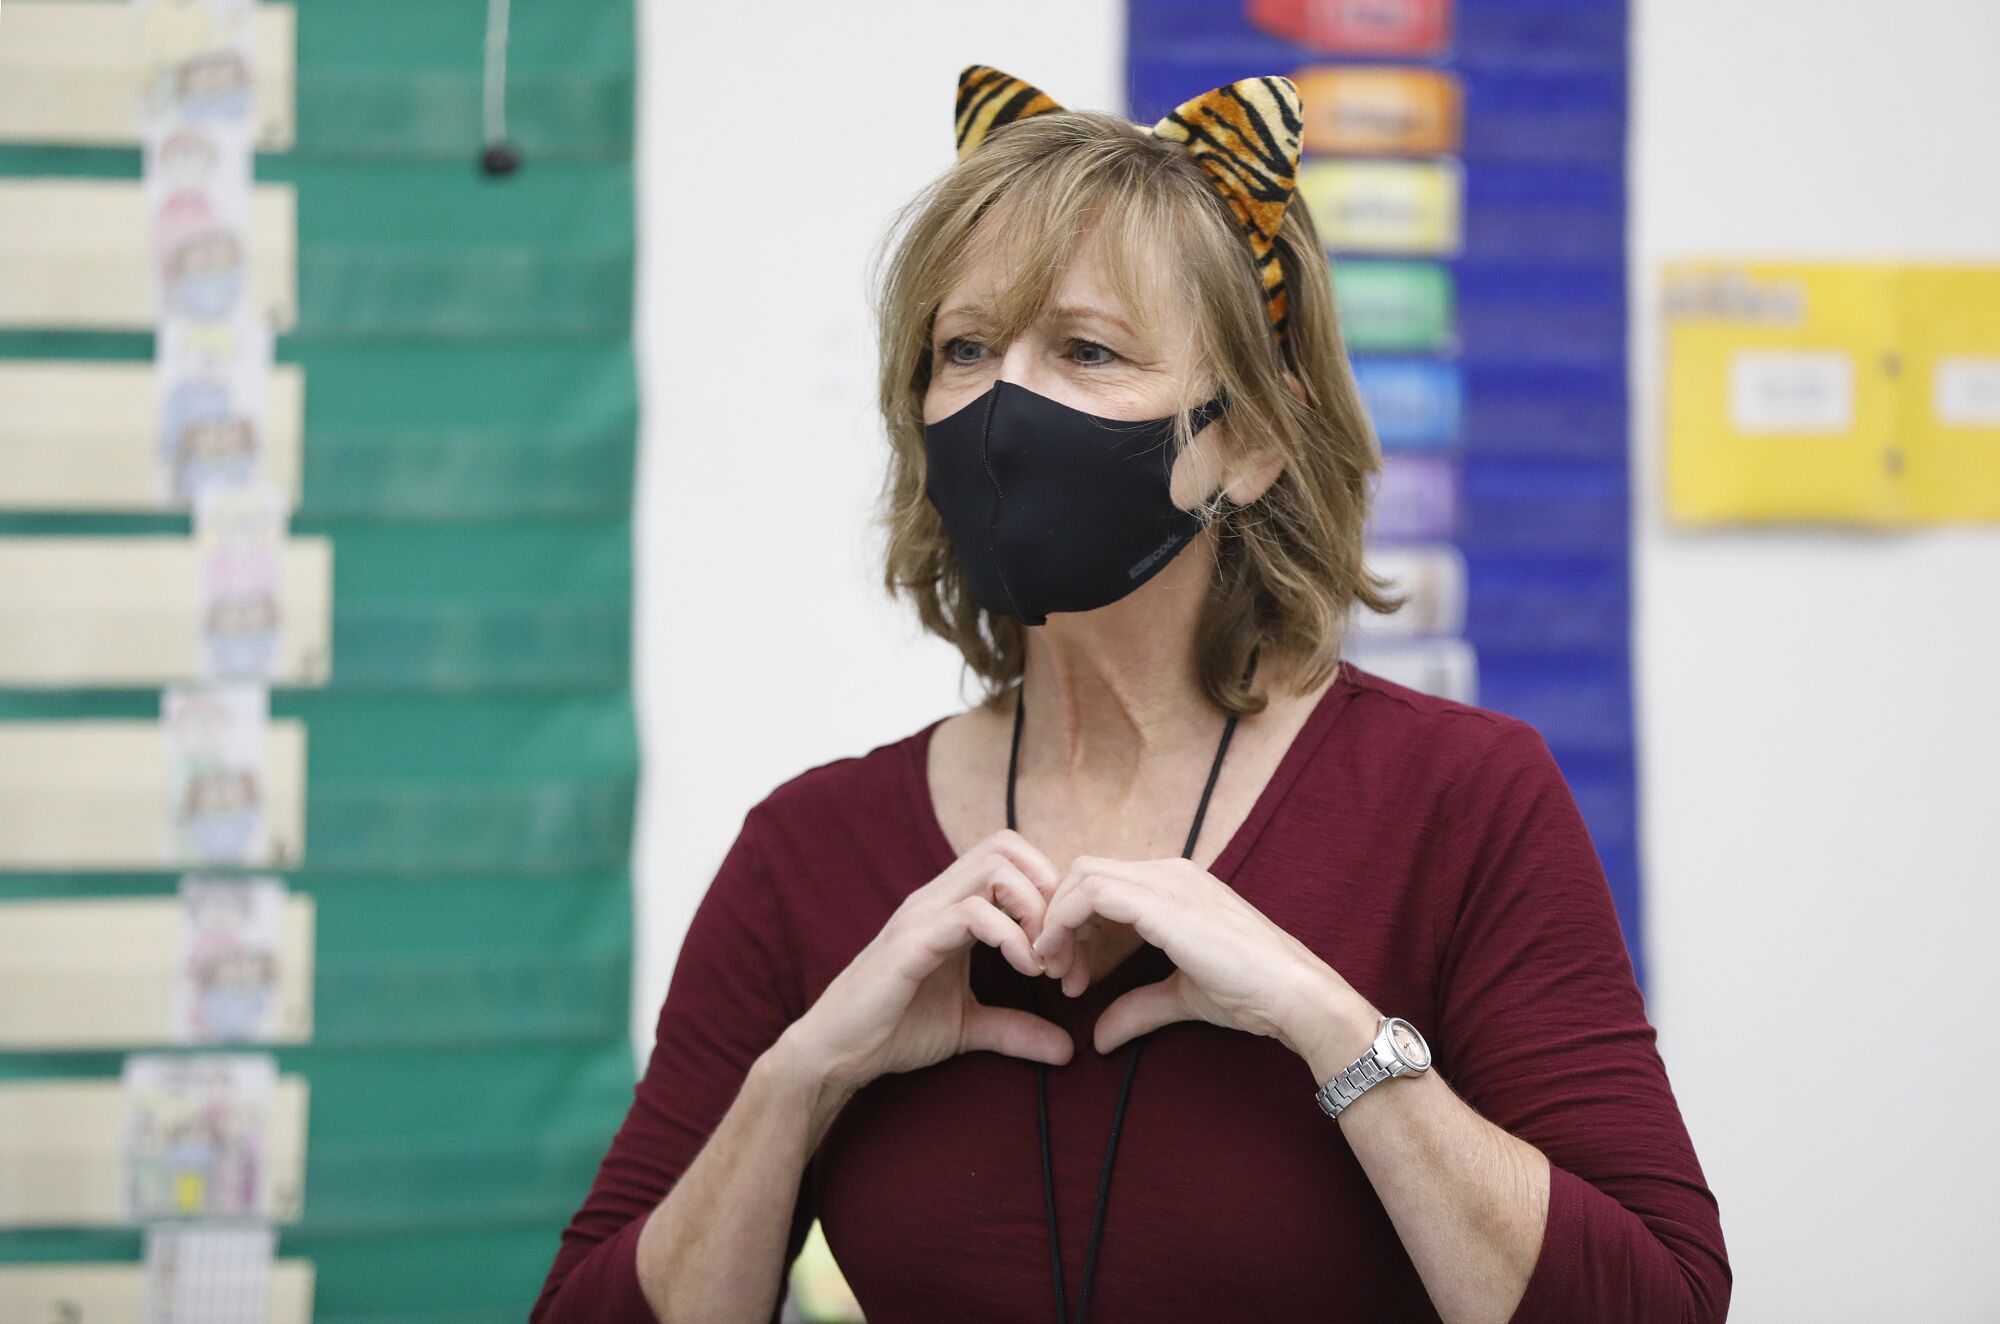 Teacher Jennifer Klein, in mask and cat ears, forms a heart with her hands for students.